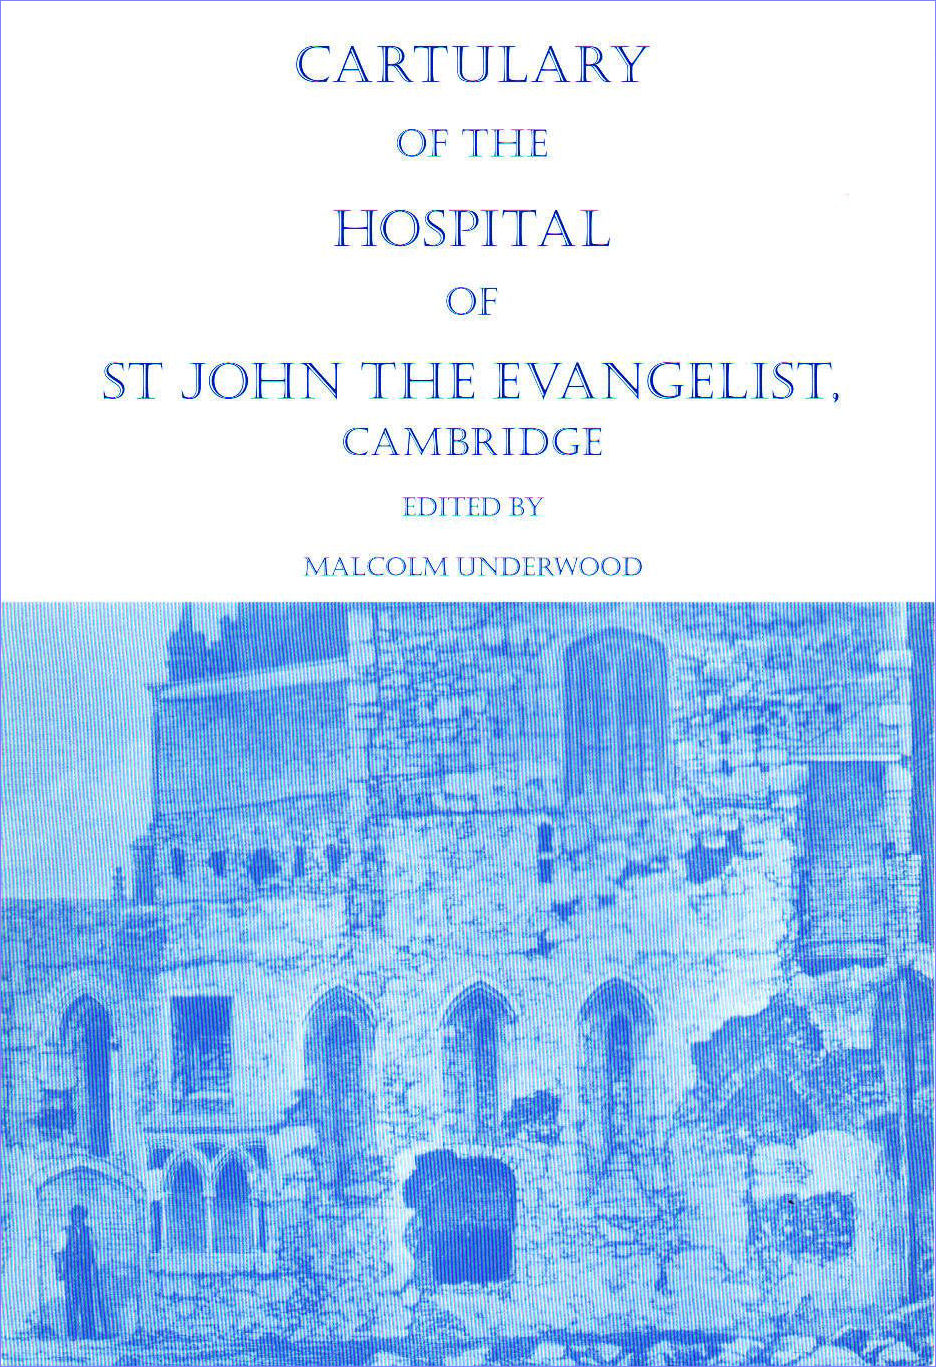 18. Cartulary of the Hospital of St John the Evangelist, Cambridge.  Edited by Malcolm Underwood